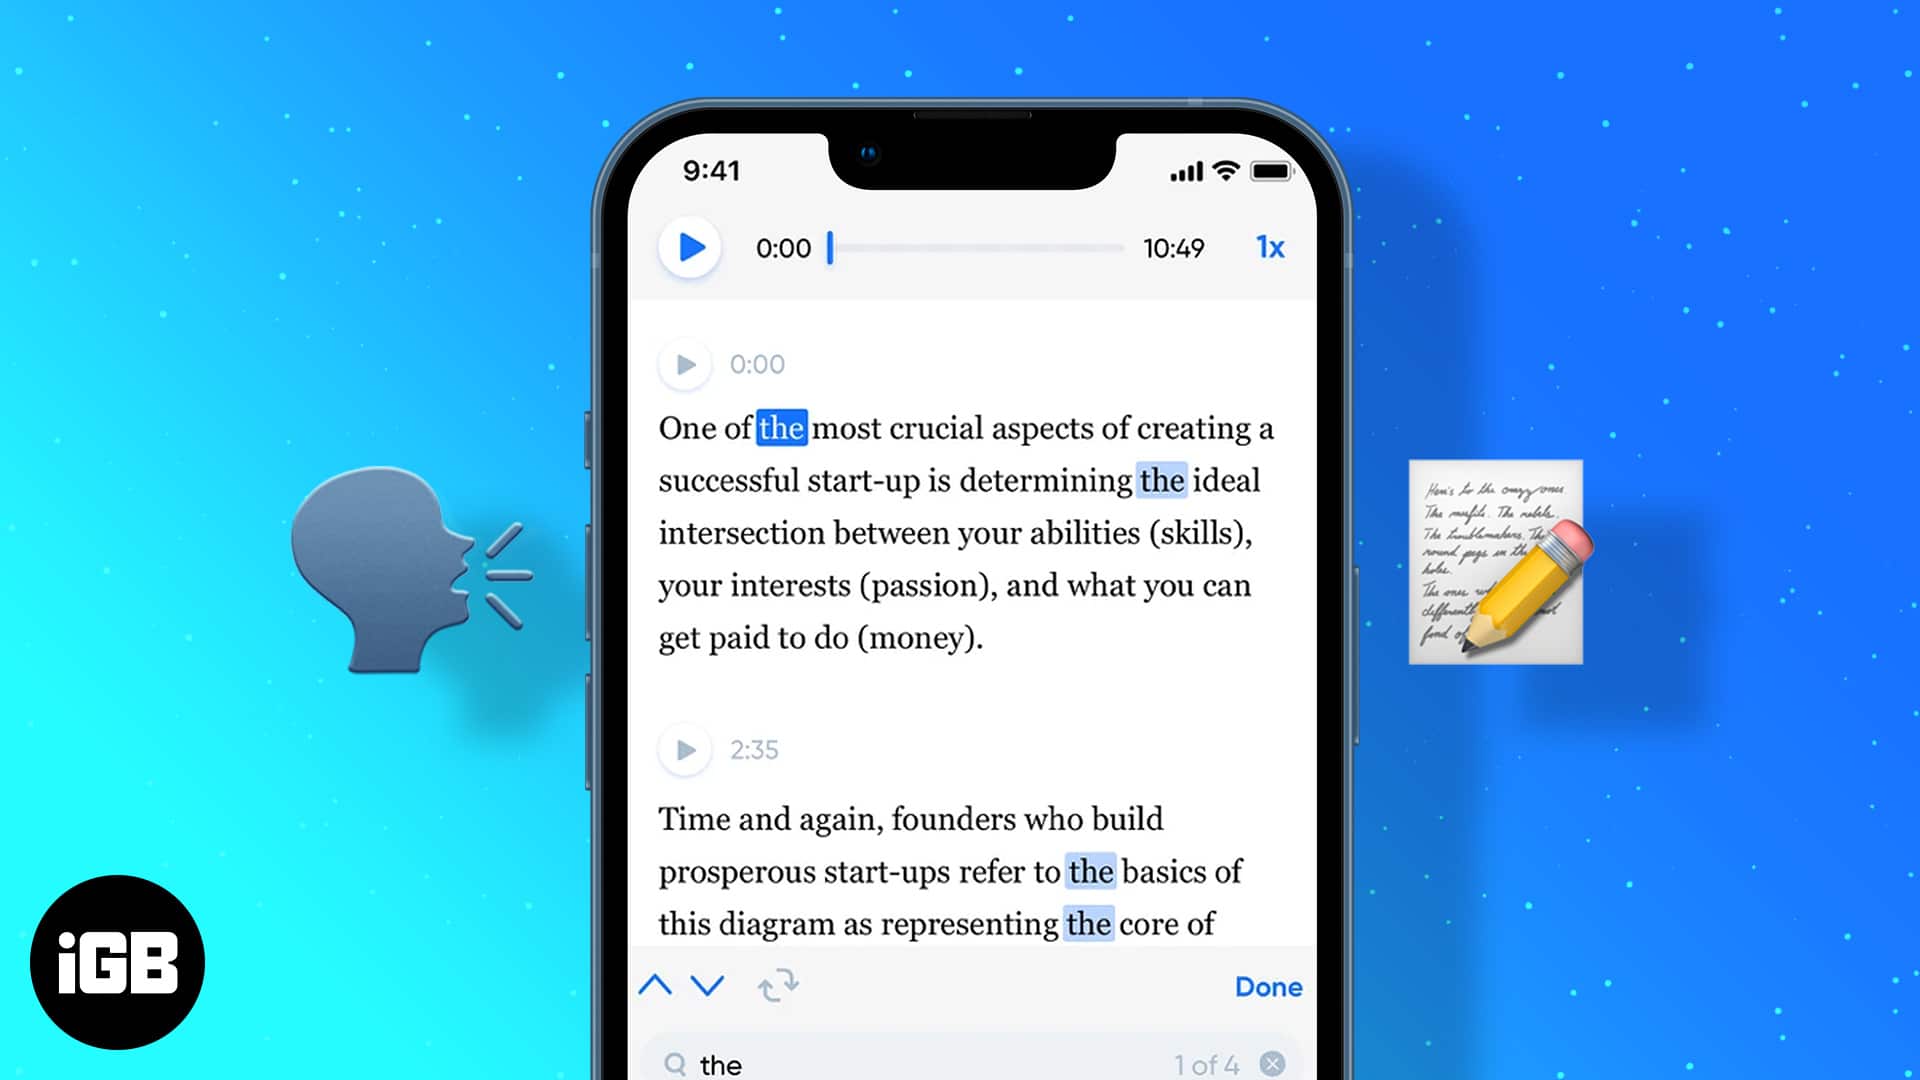 speech to text app for iphone